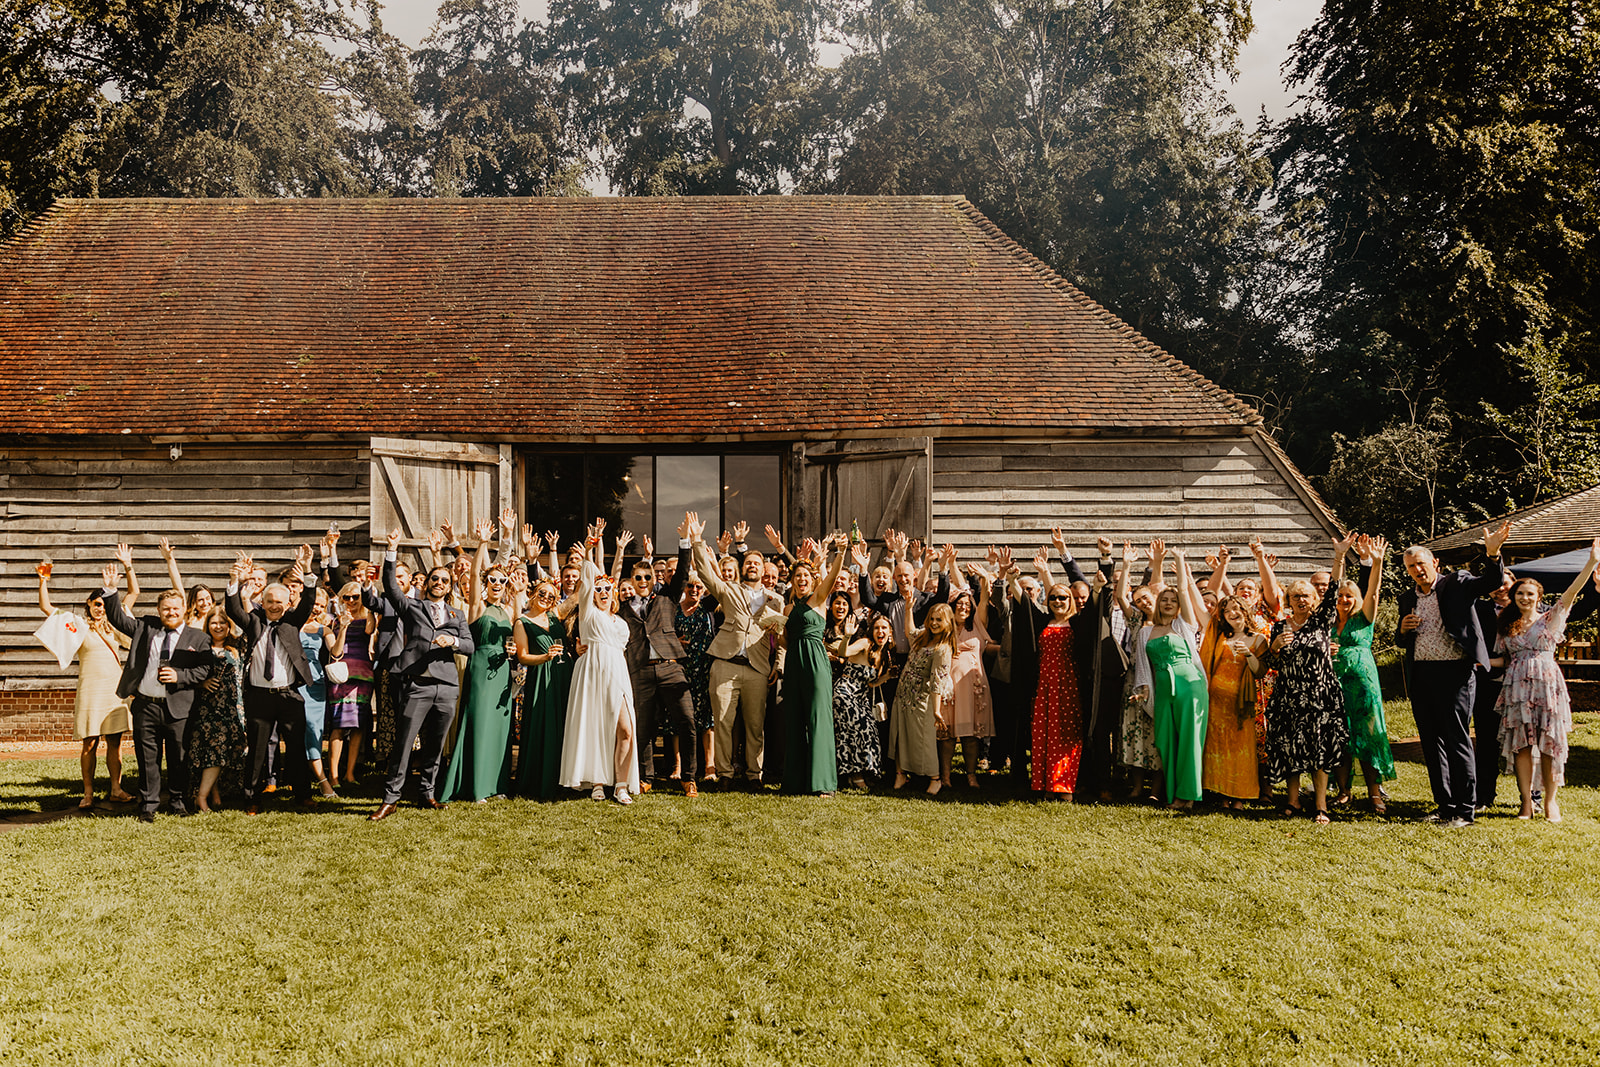 Wedding guests group photo at a wedding at Gilbert White's Hampshire. By OliveJoy Photography.